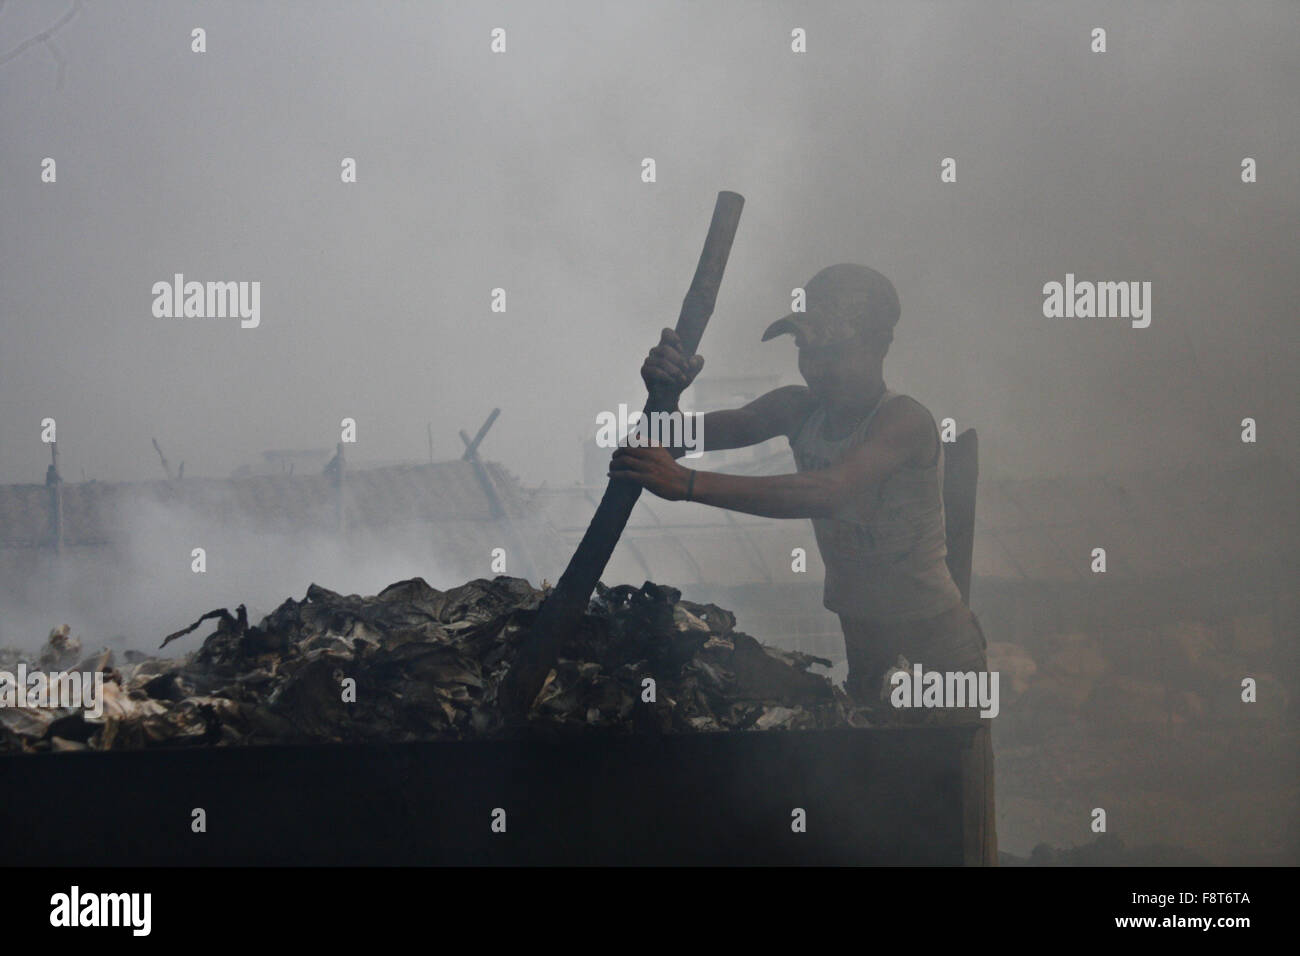 A Bangladeshi day labor works in the polluted environment at Hazaribagh tannery area in Dhaka, Bangladesh. Stock Photo